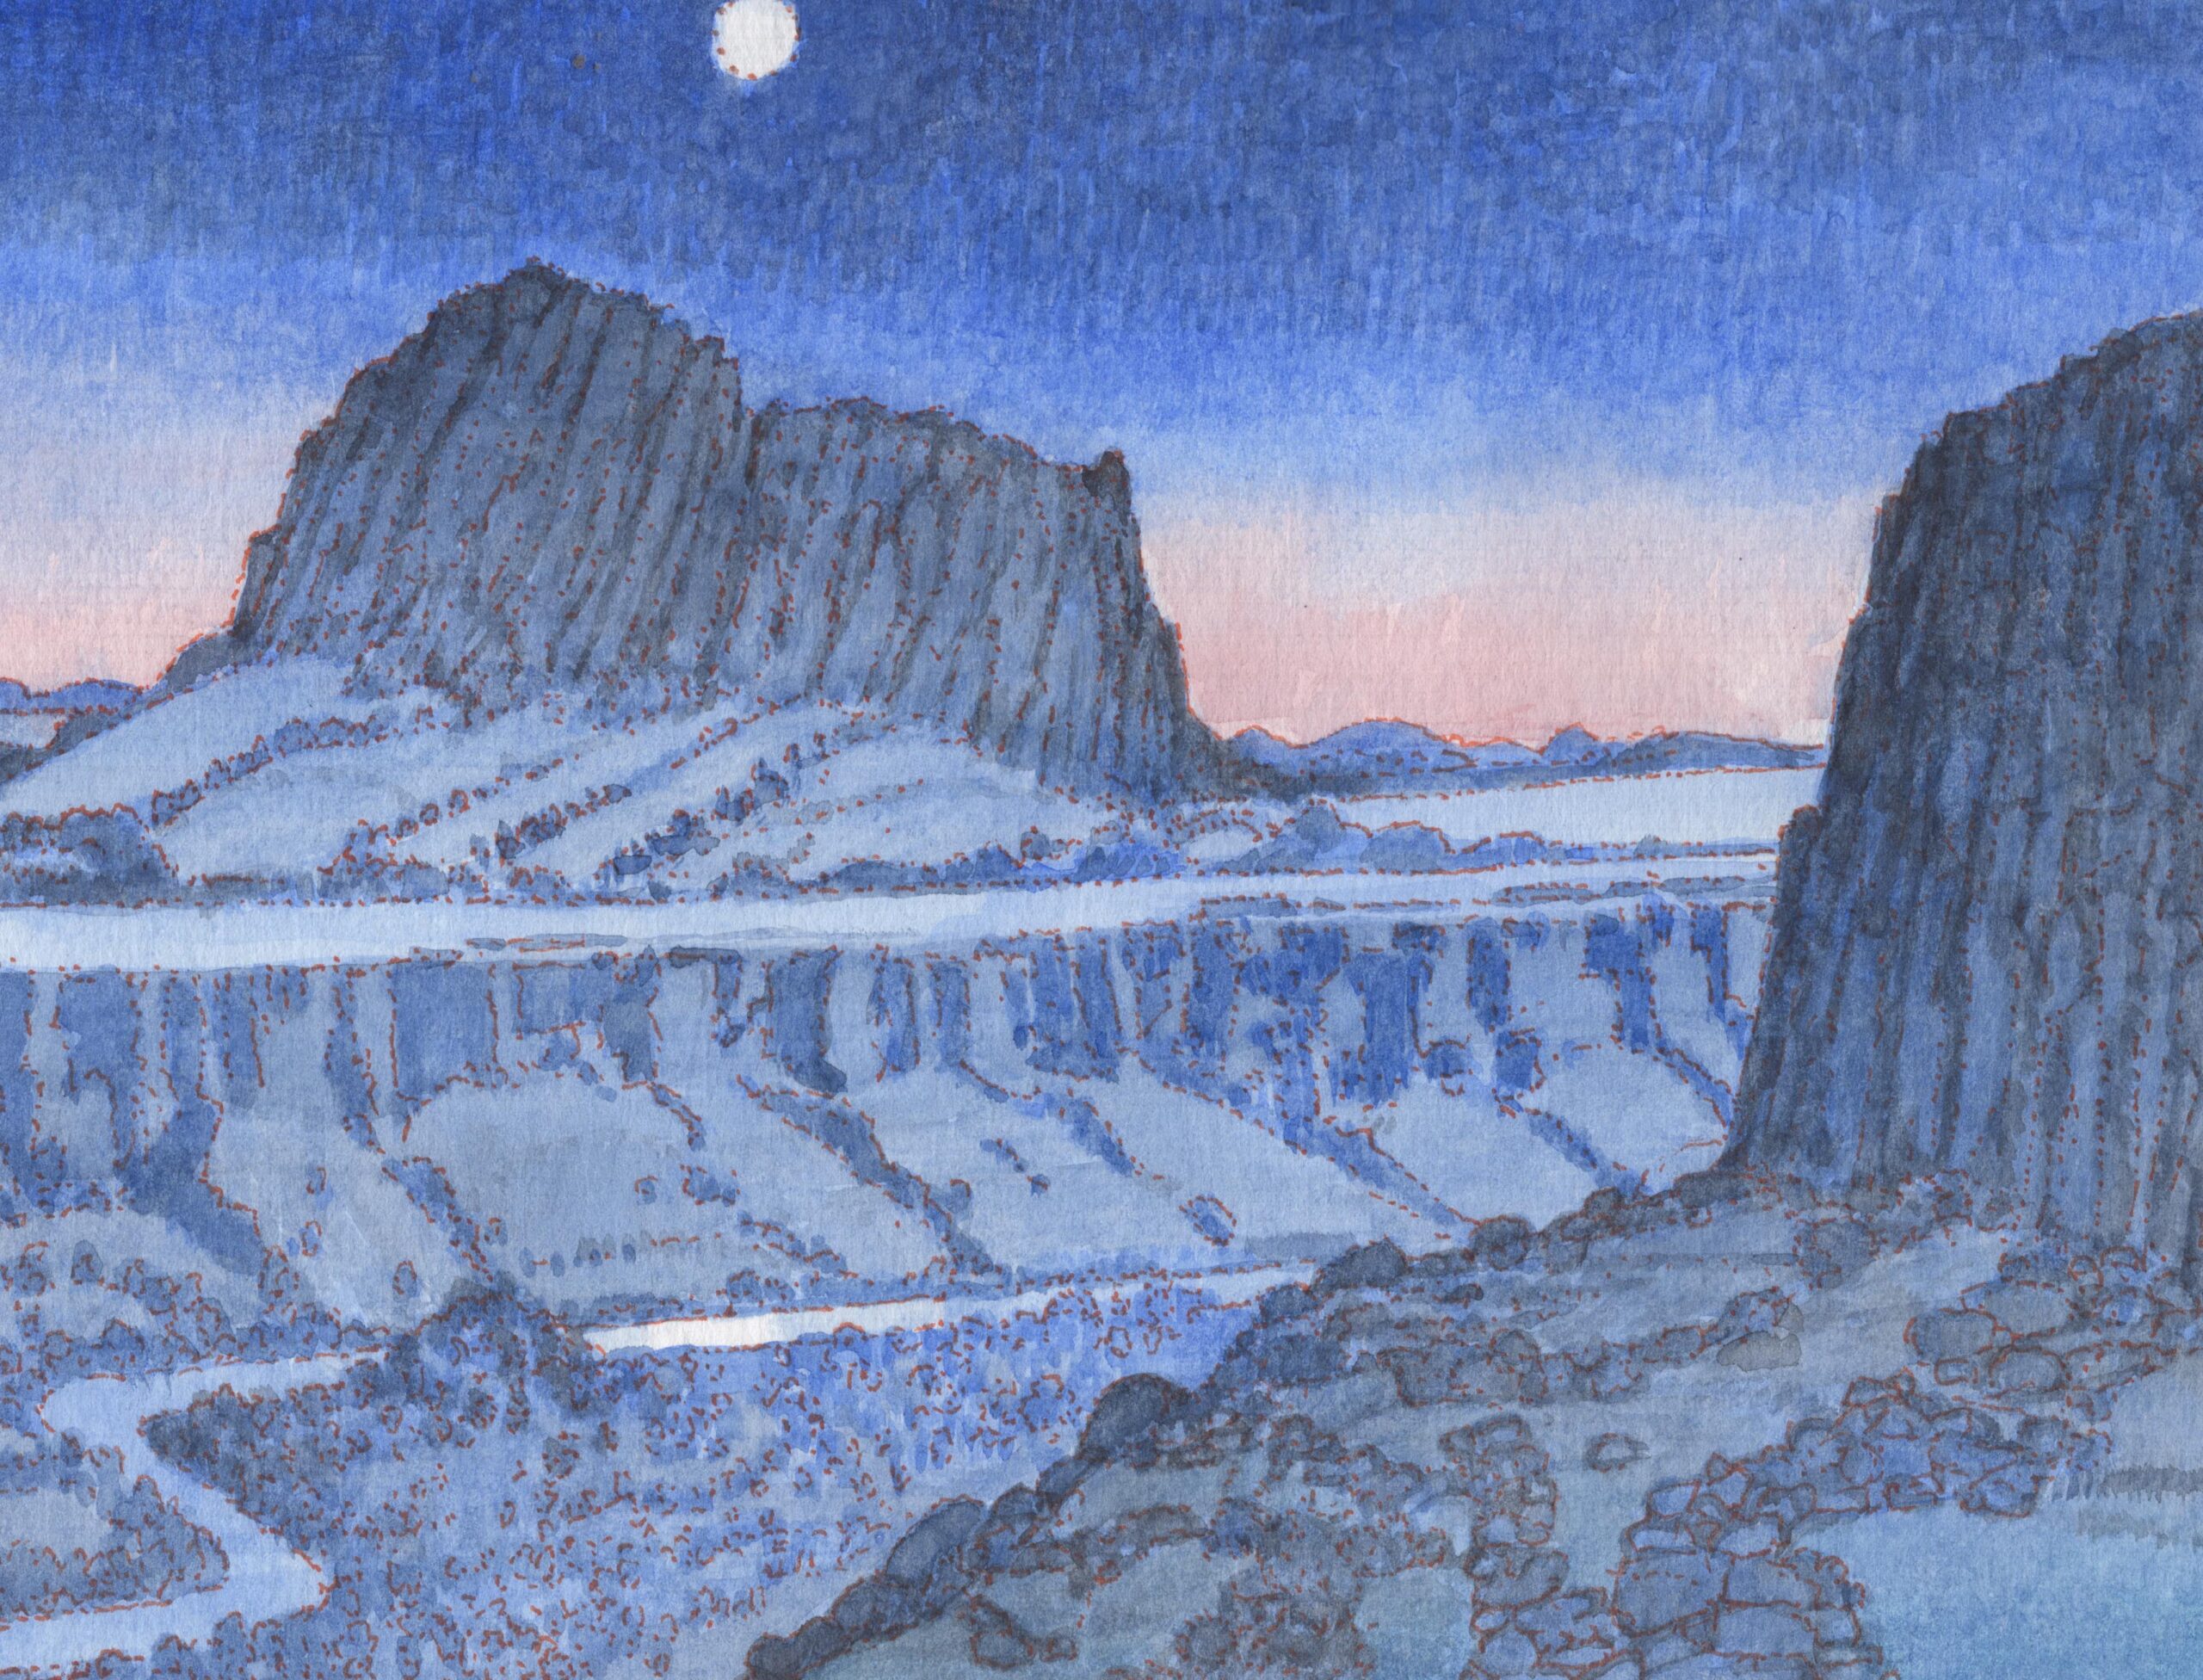 
							

									James McElhinney									Desert Dawn 									watercolor on paper<br />
7 x 10 inches									


							